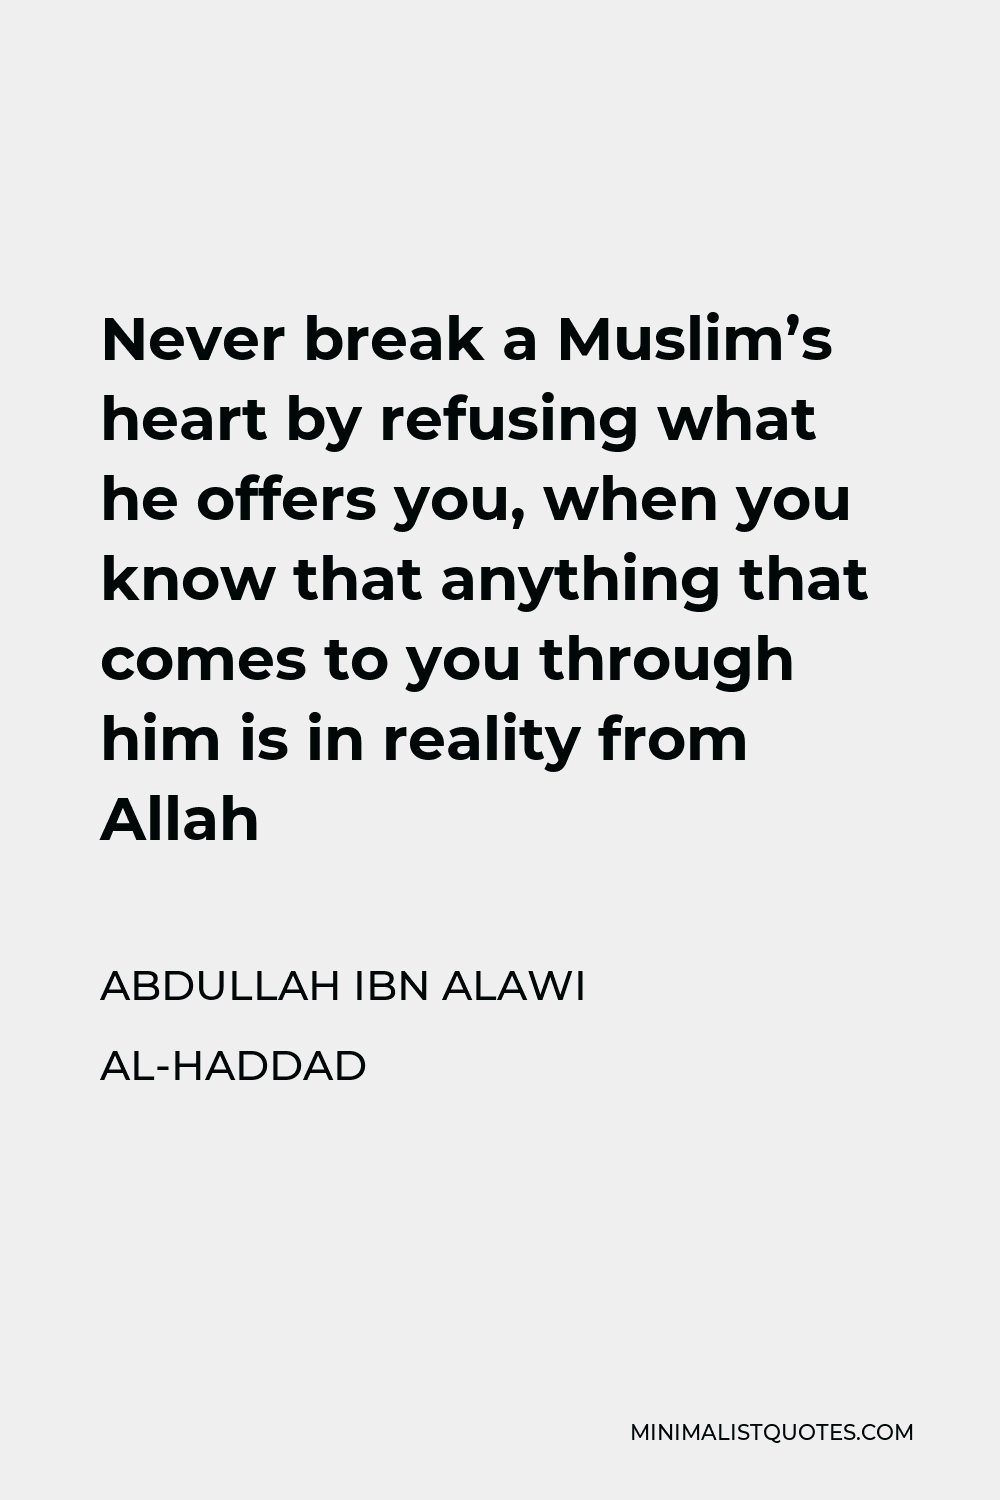 Abdullah ibn Alawi al-Haddad Quote - Never break a Muslim’s heart by refusing what he offers you, when you know that anything that comes to you through him is in reality from Allah